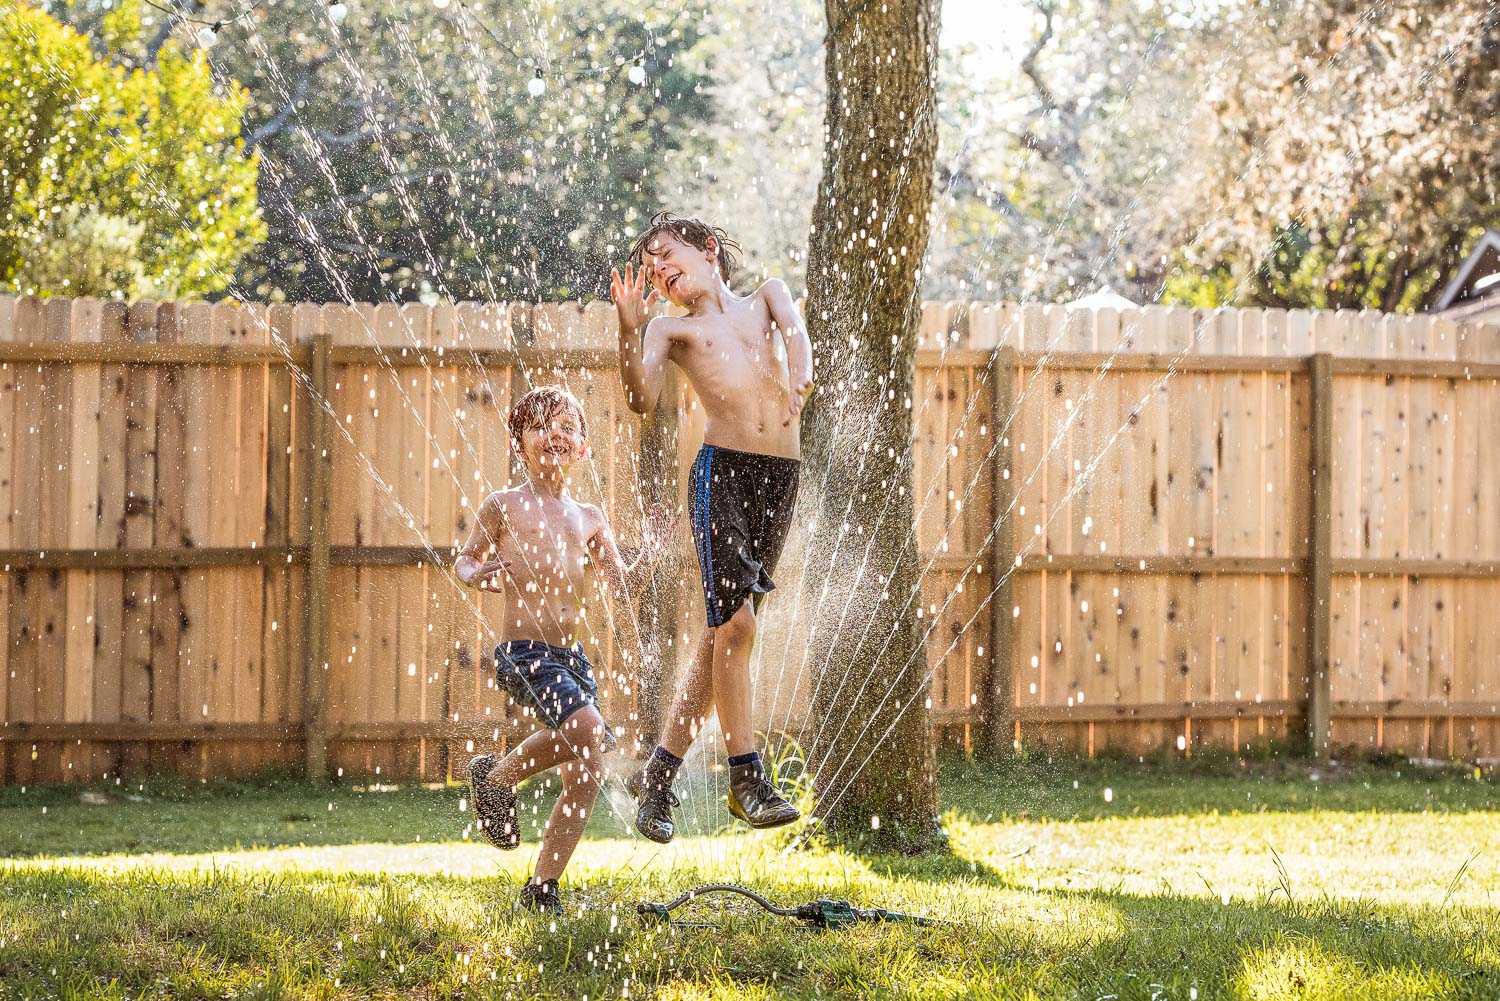 Two young boys jumping joyously through a backyard water sprinkler.